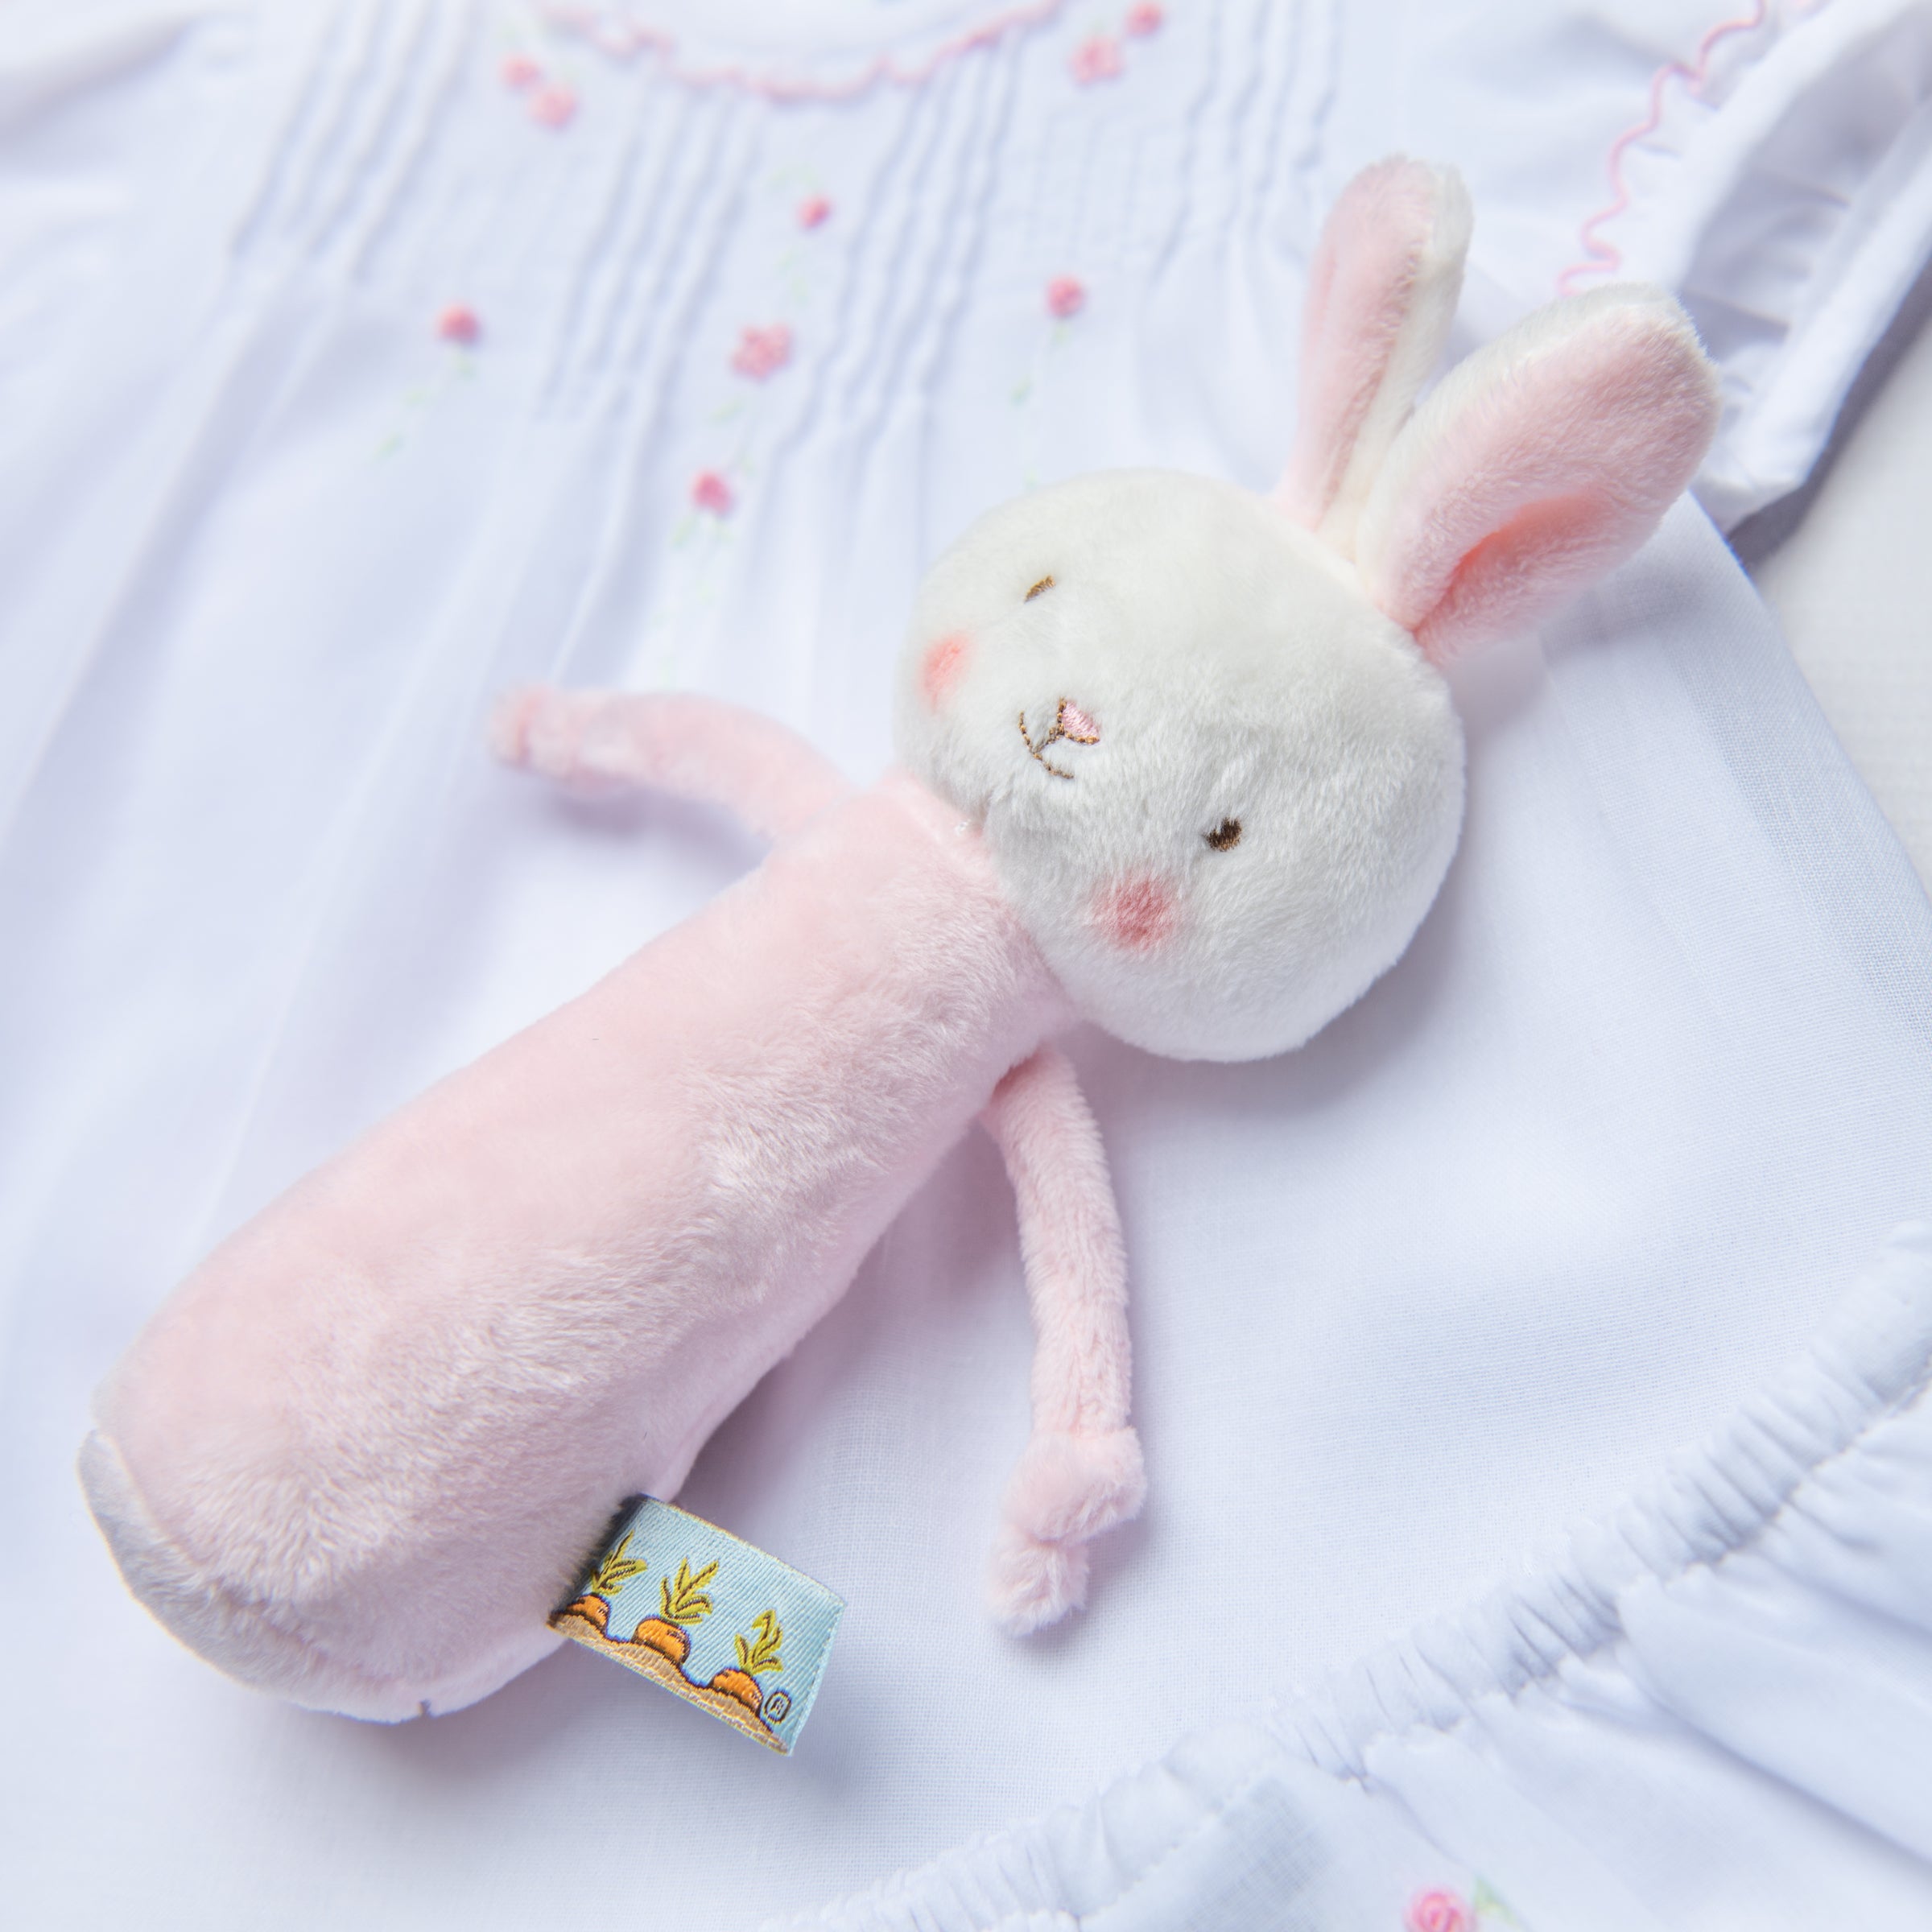 Friendly Chime Rattle - Pink Bunny – Baby Blossom Company